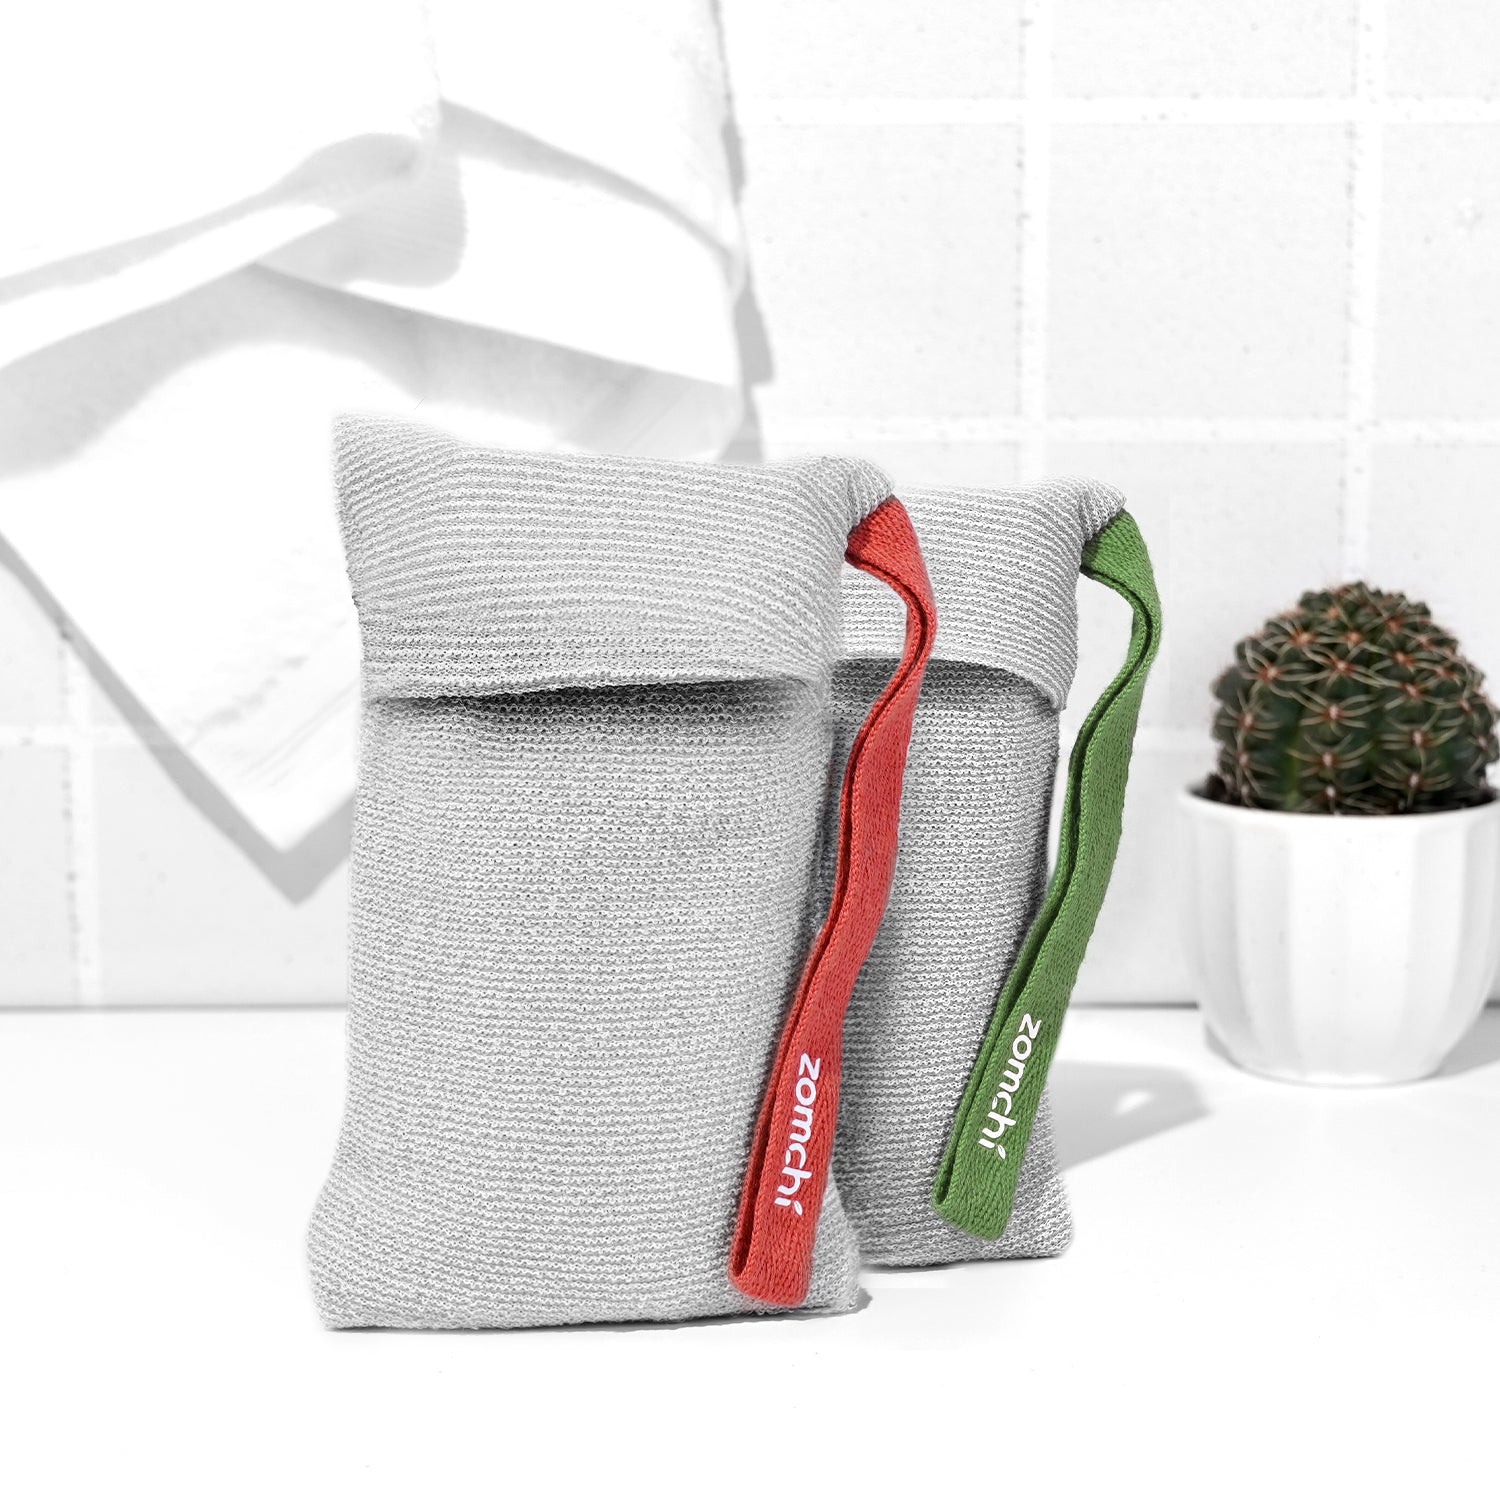 2 Pieces Gentl Soap Pouch and Soap Saver Pocket